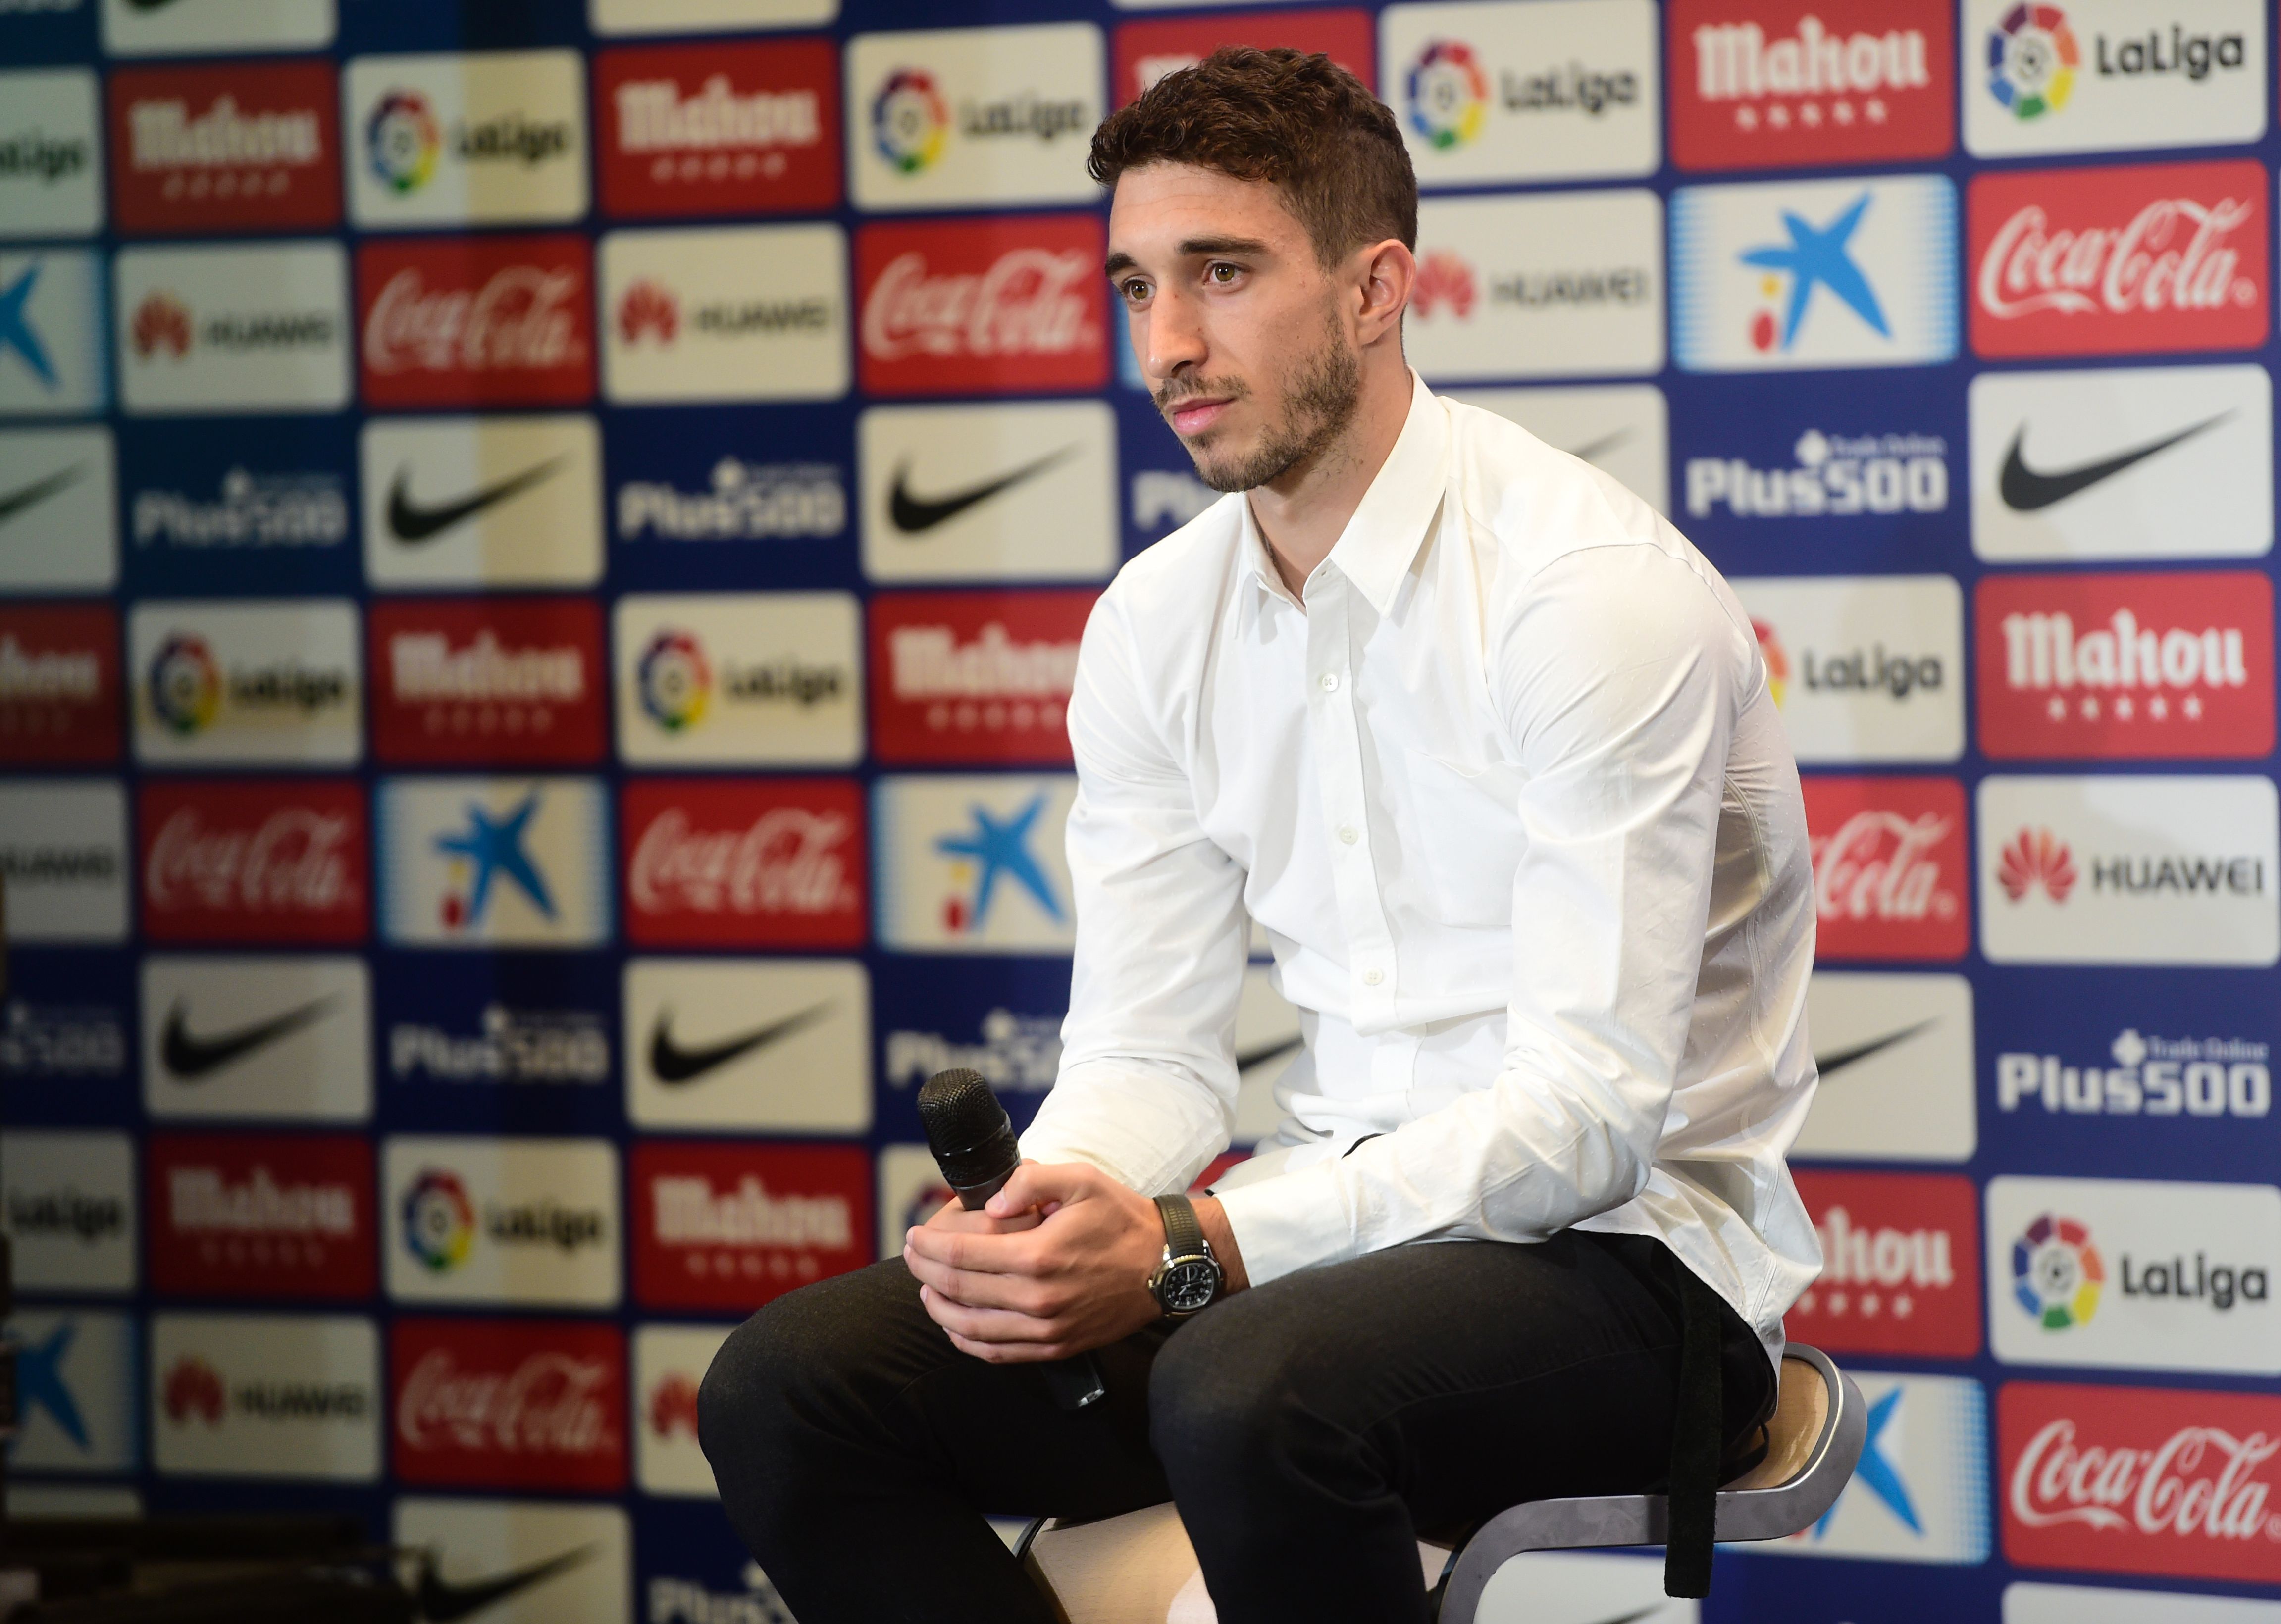 Atletico de Madrid's Croatian defender Sime Vrsaljko listens to journalists during his presentation as new player of the club at the Vicente Calderon stadium in Madrid on July 18, 2016. / AFP / PIERRE-PHILIPPE MARCOU        (Photo credit should read PIERRE-PHILIPPE MARCOU/AFP/Getty Images)